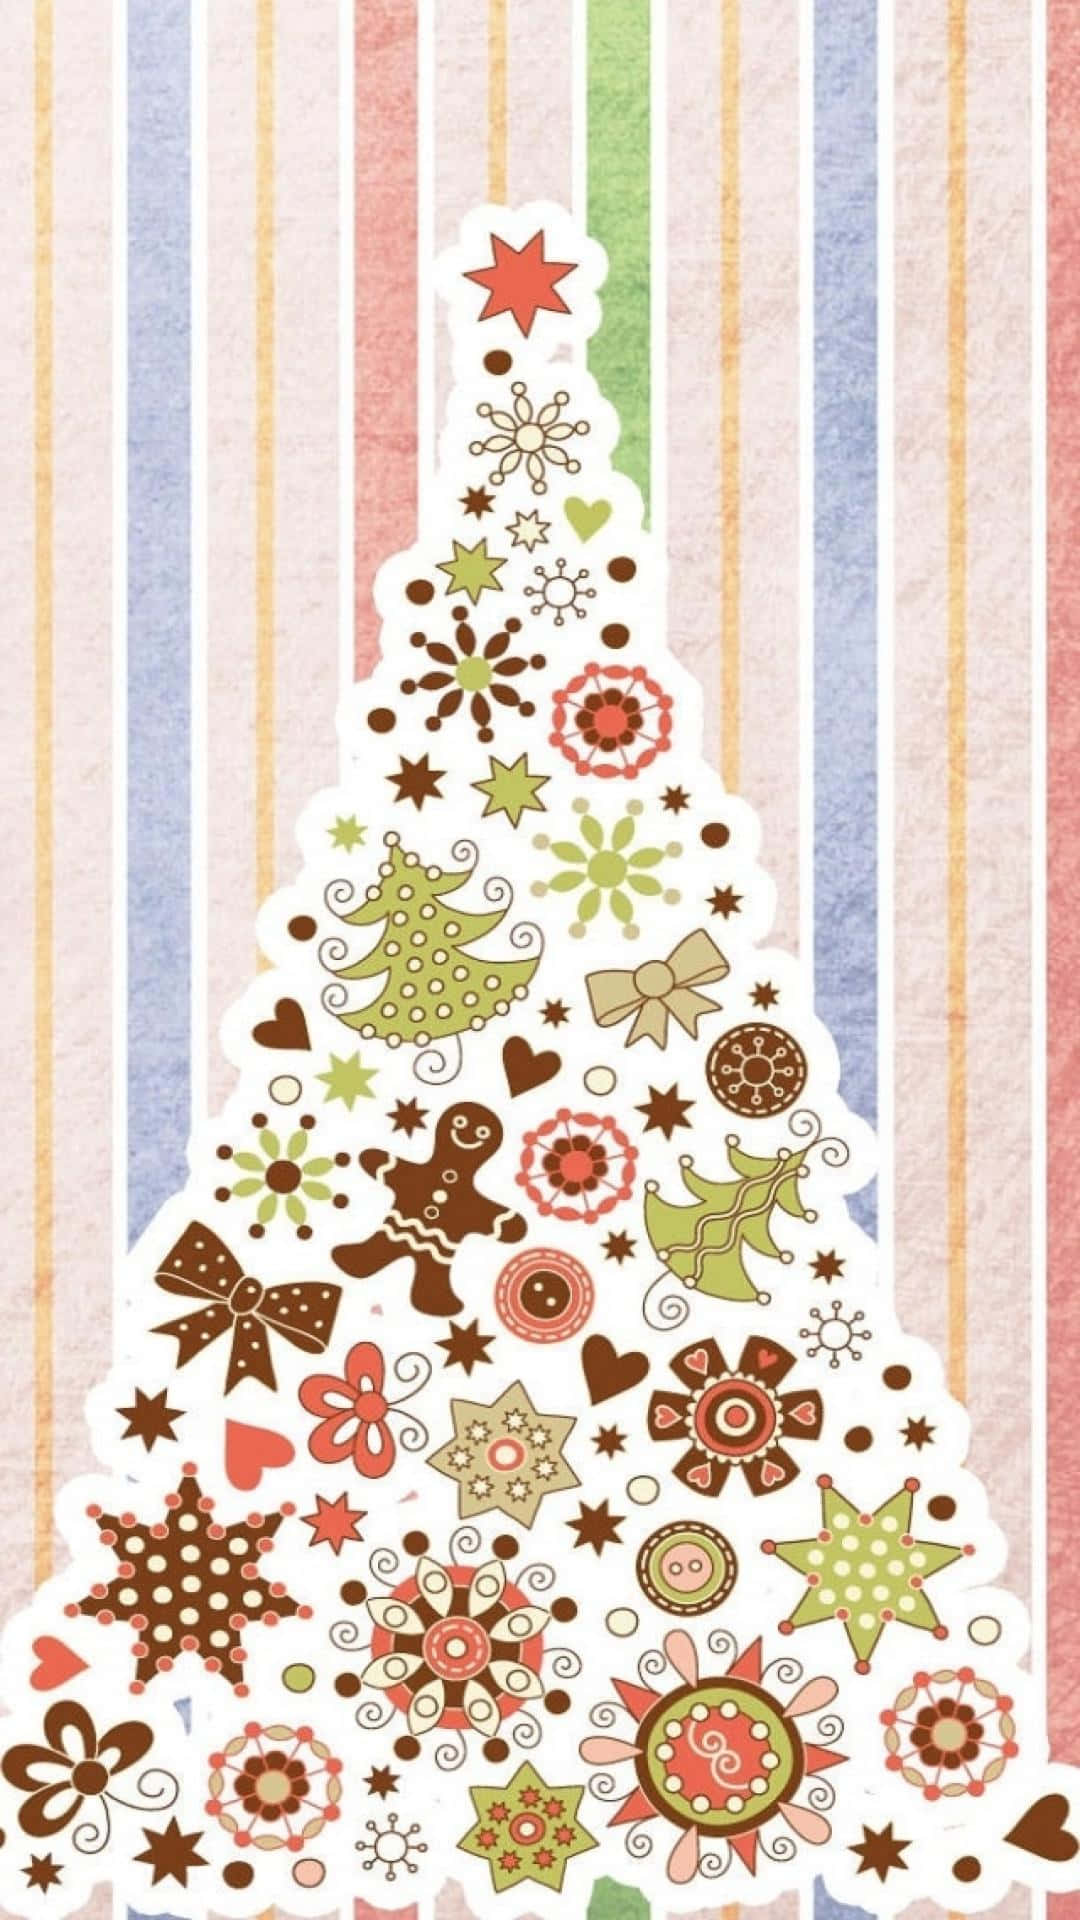 Aesthetic Christmas Tree With Stars Pattern Wallpaper